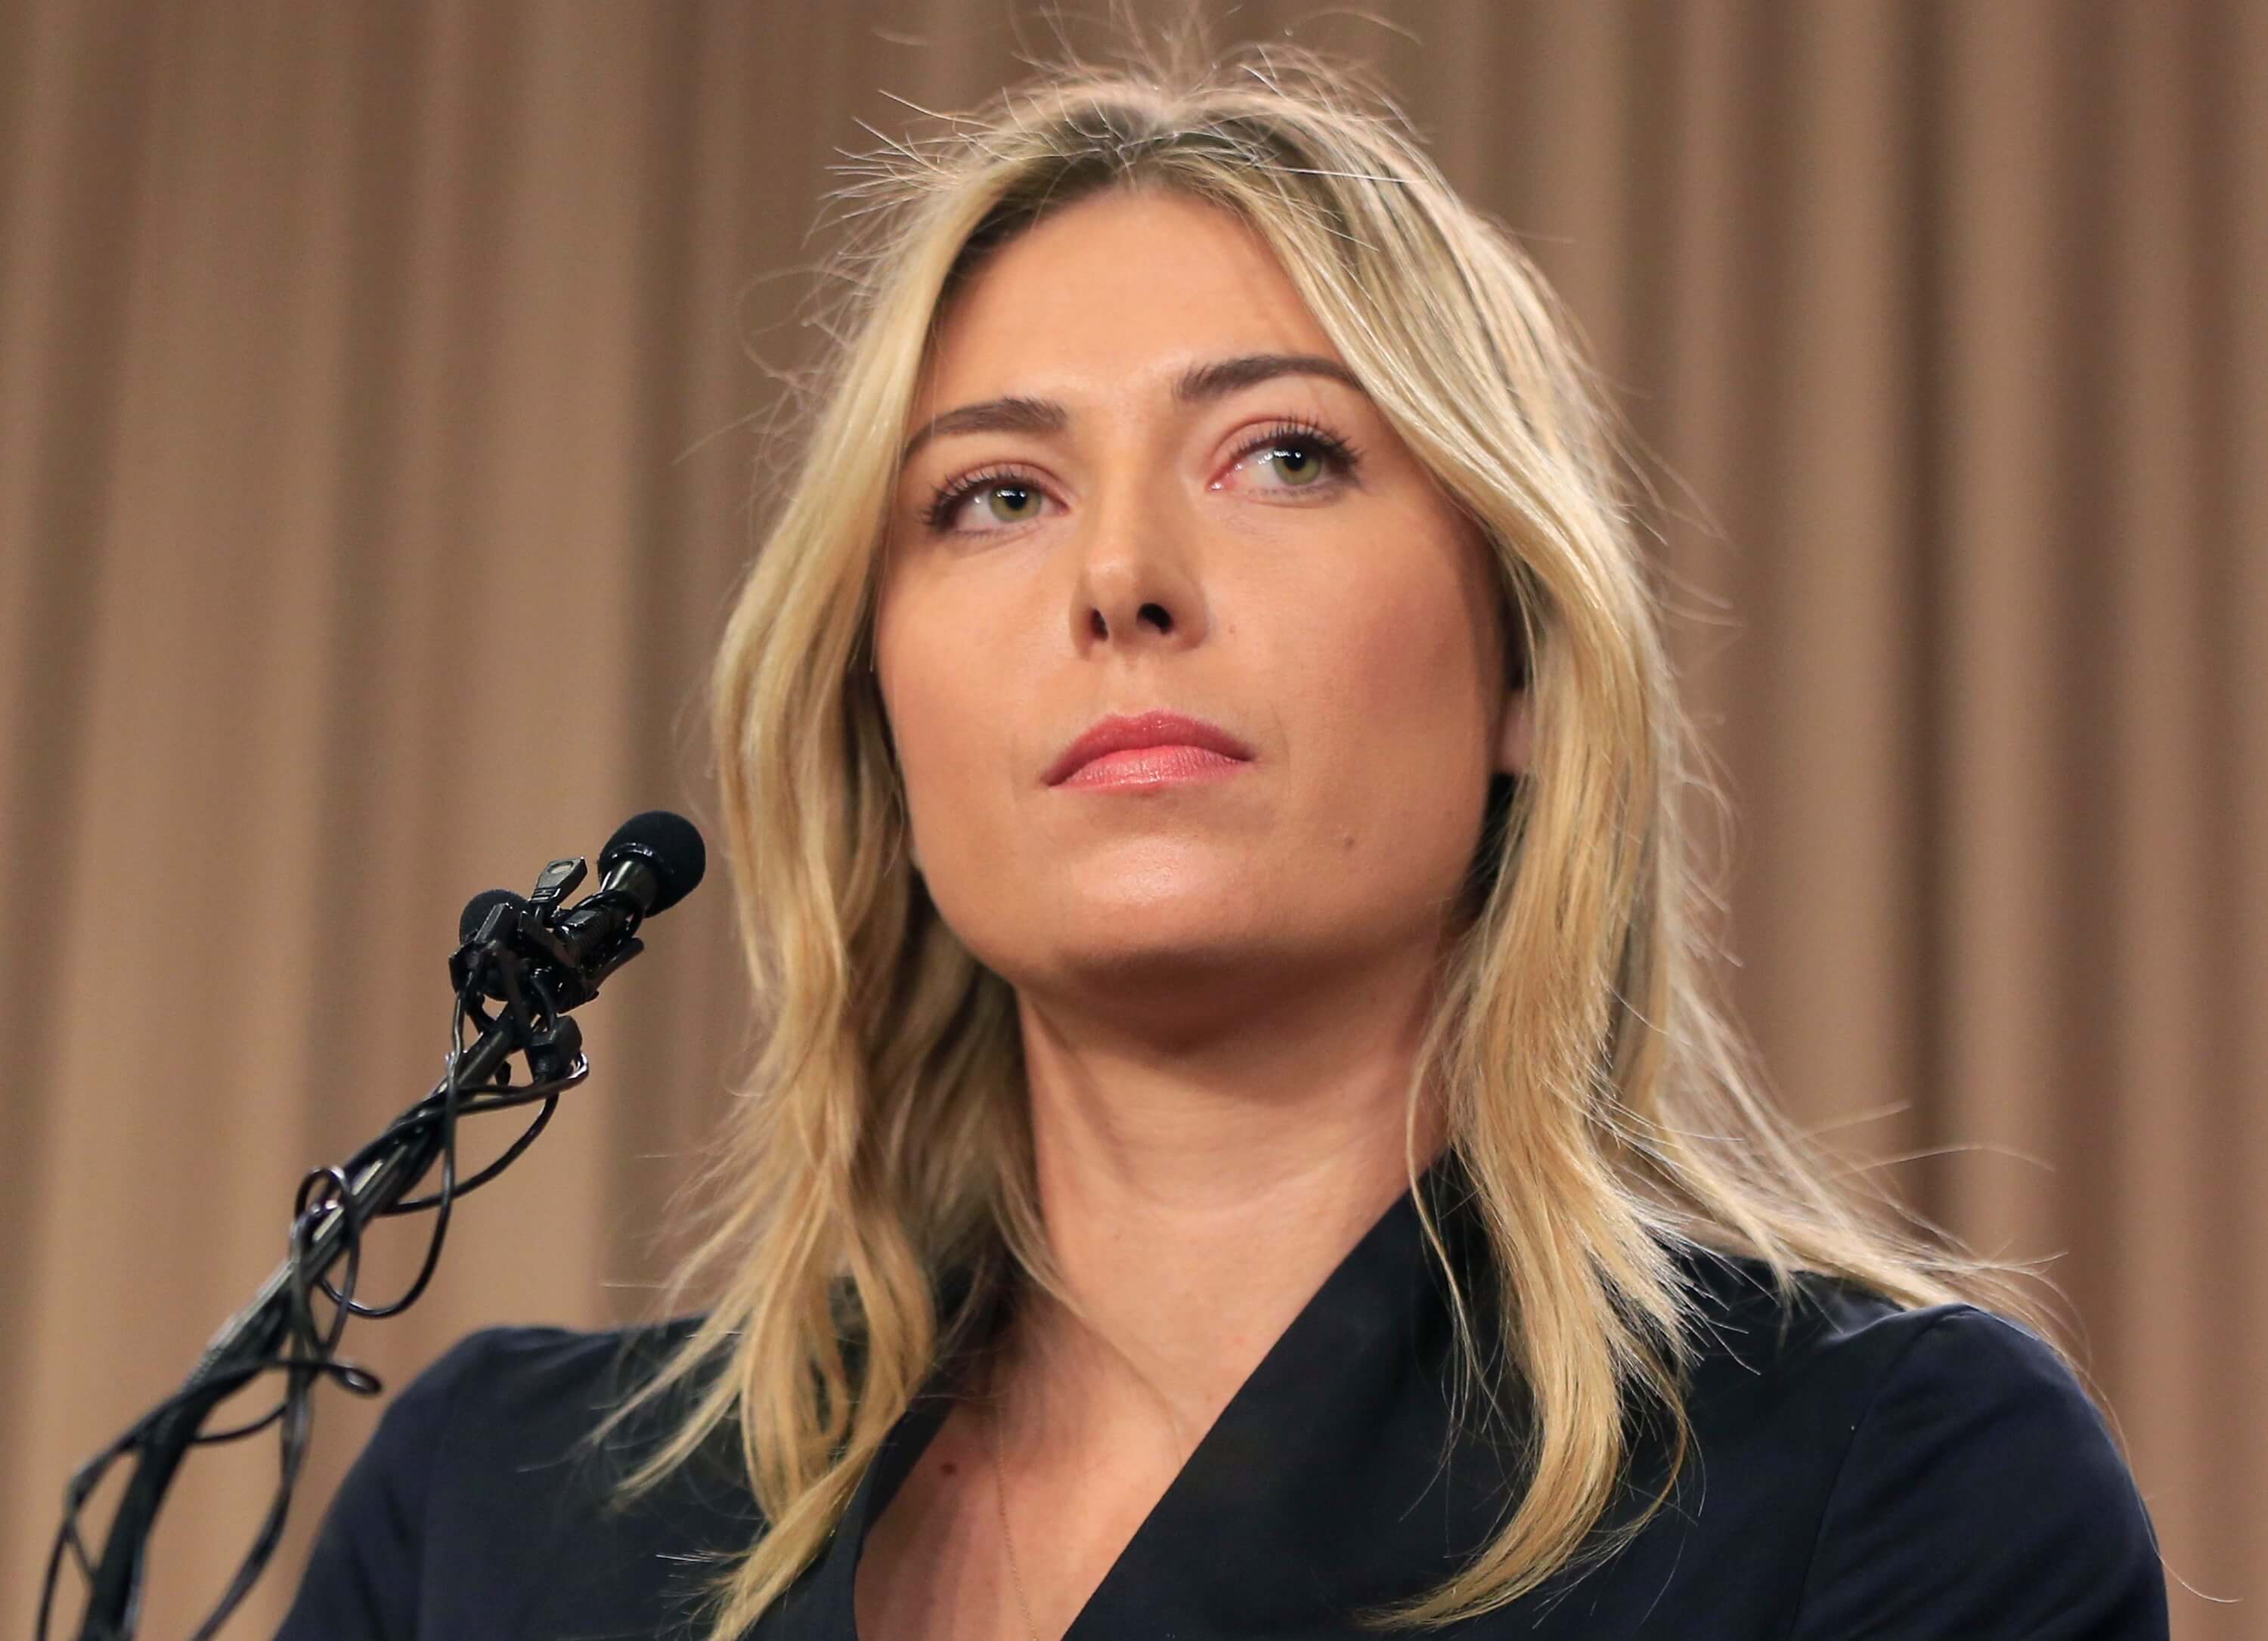 photo showing tennis star Maria Sharapova speaking about her failed drug test